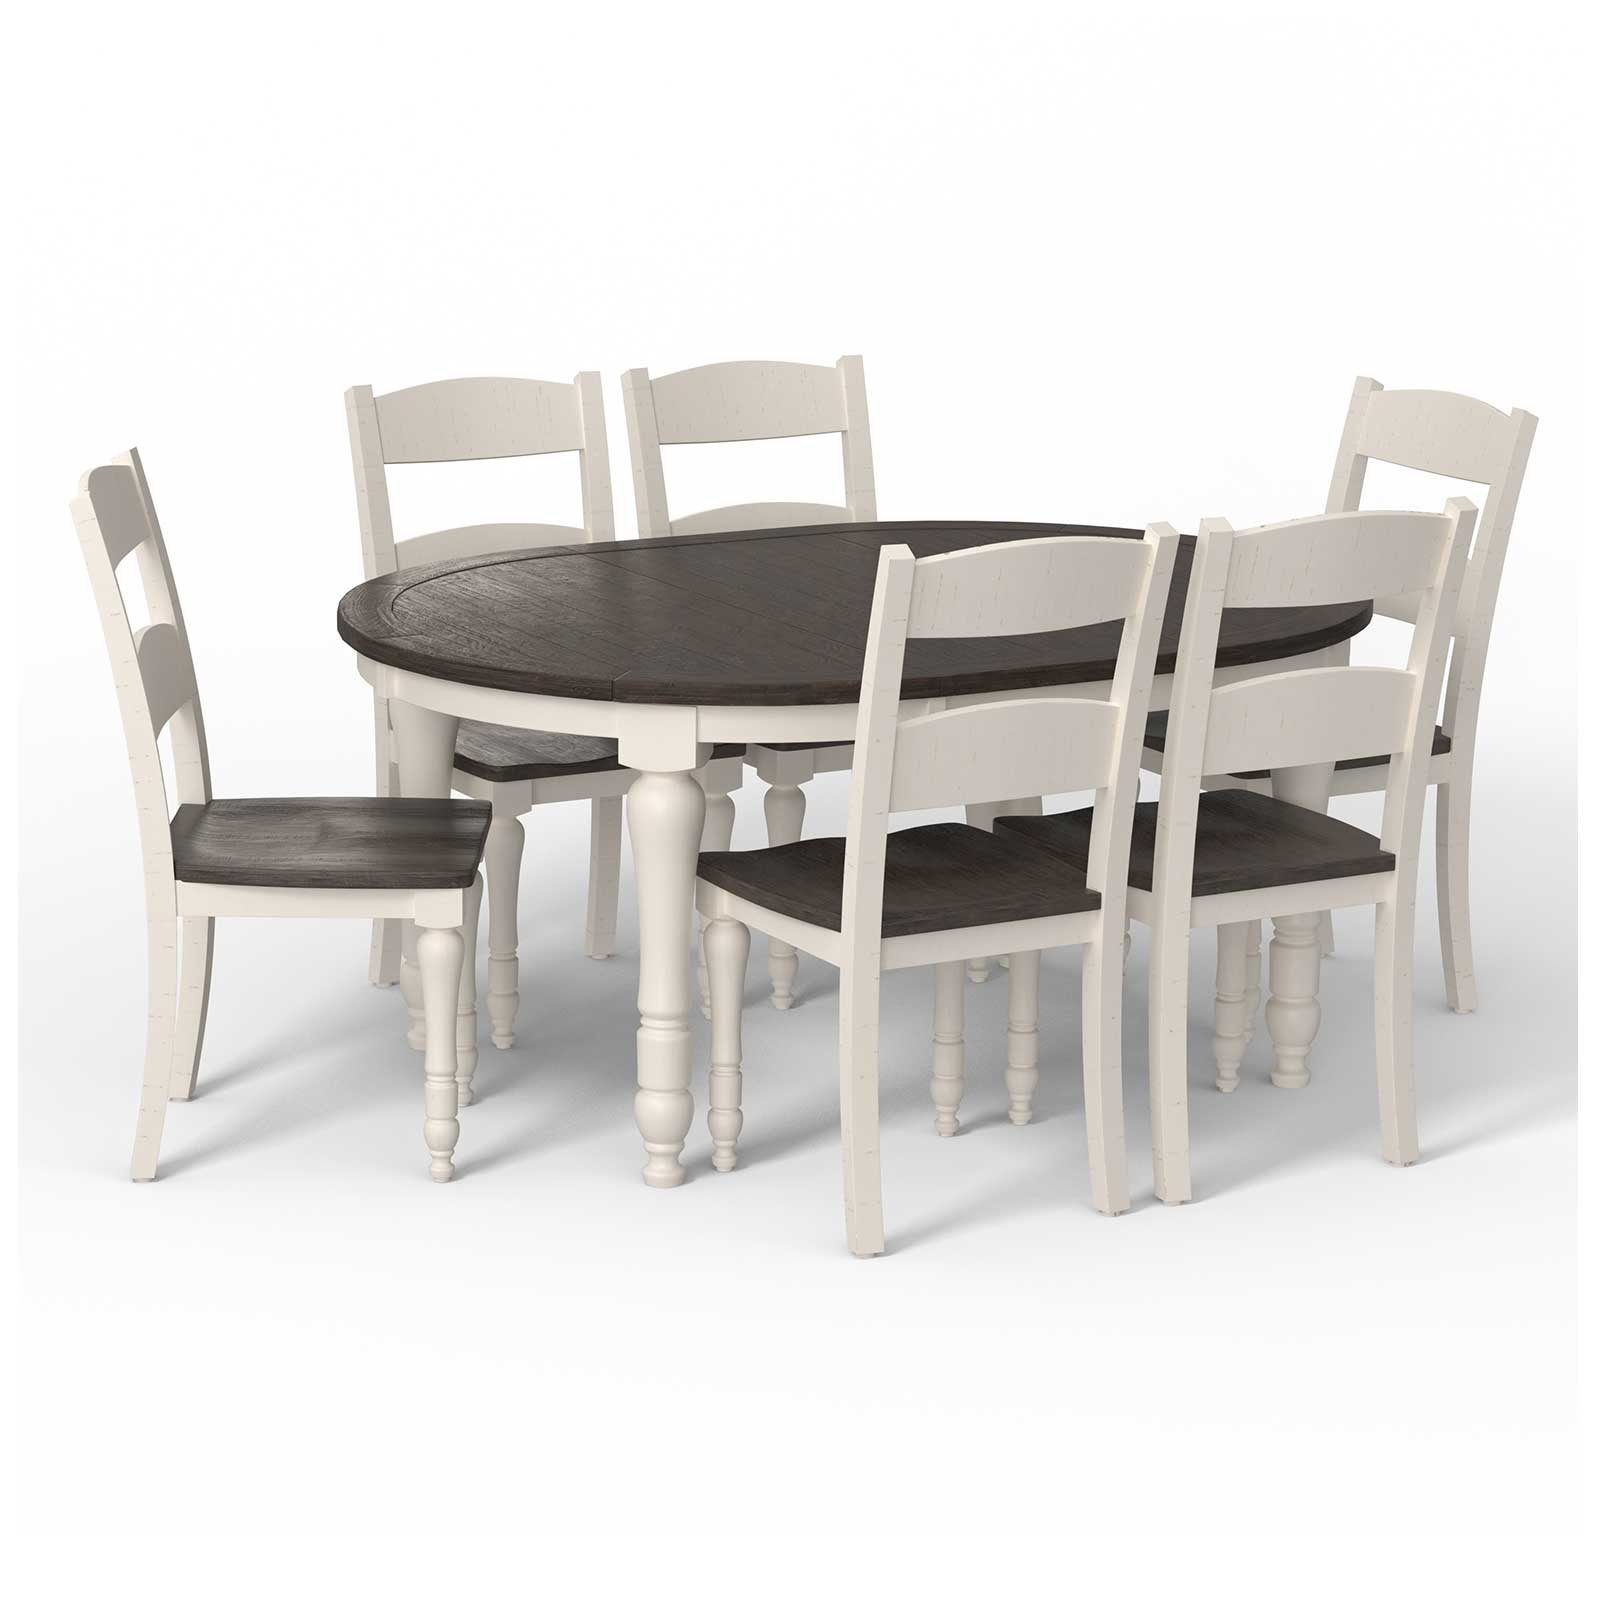 Jofran Madison County Oval Dining Table & 6 Chairs